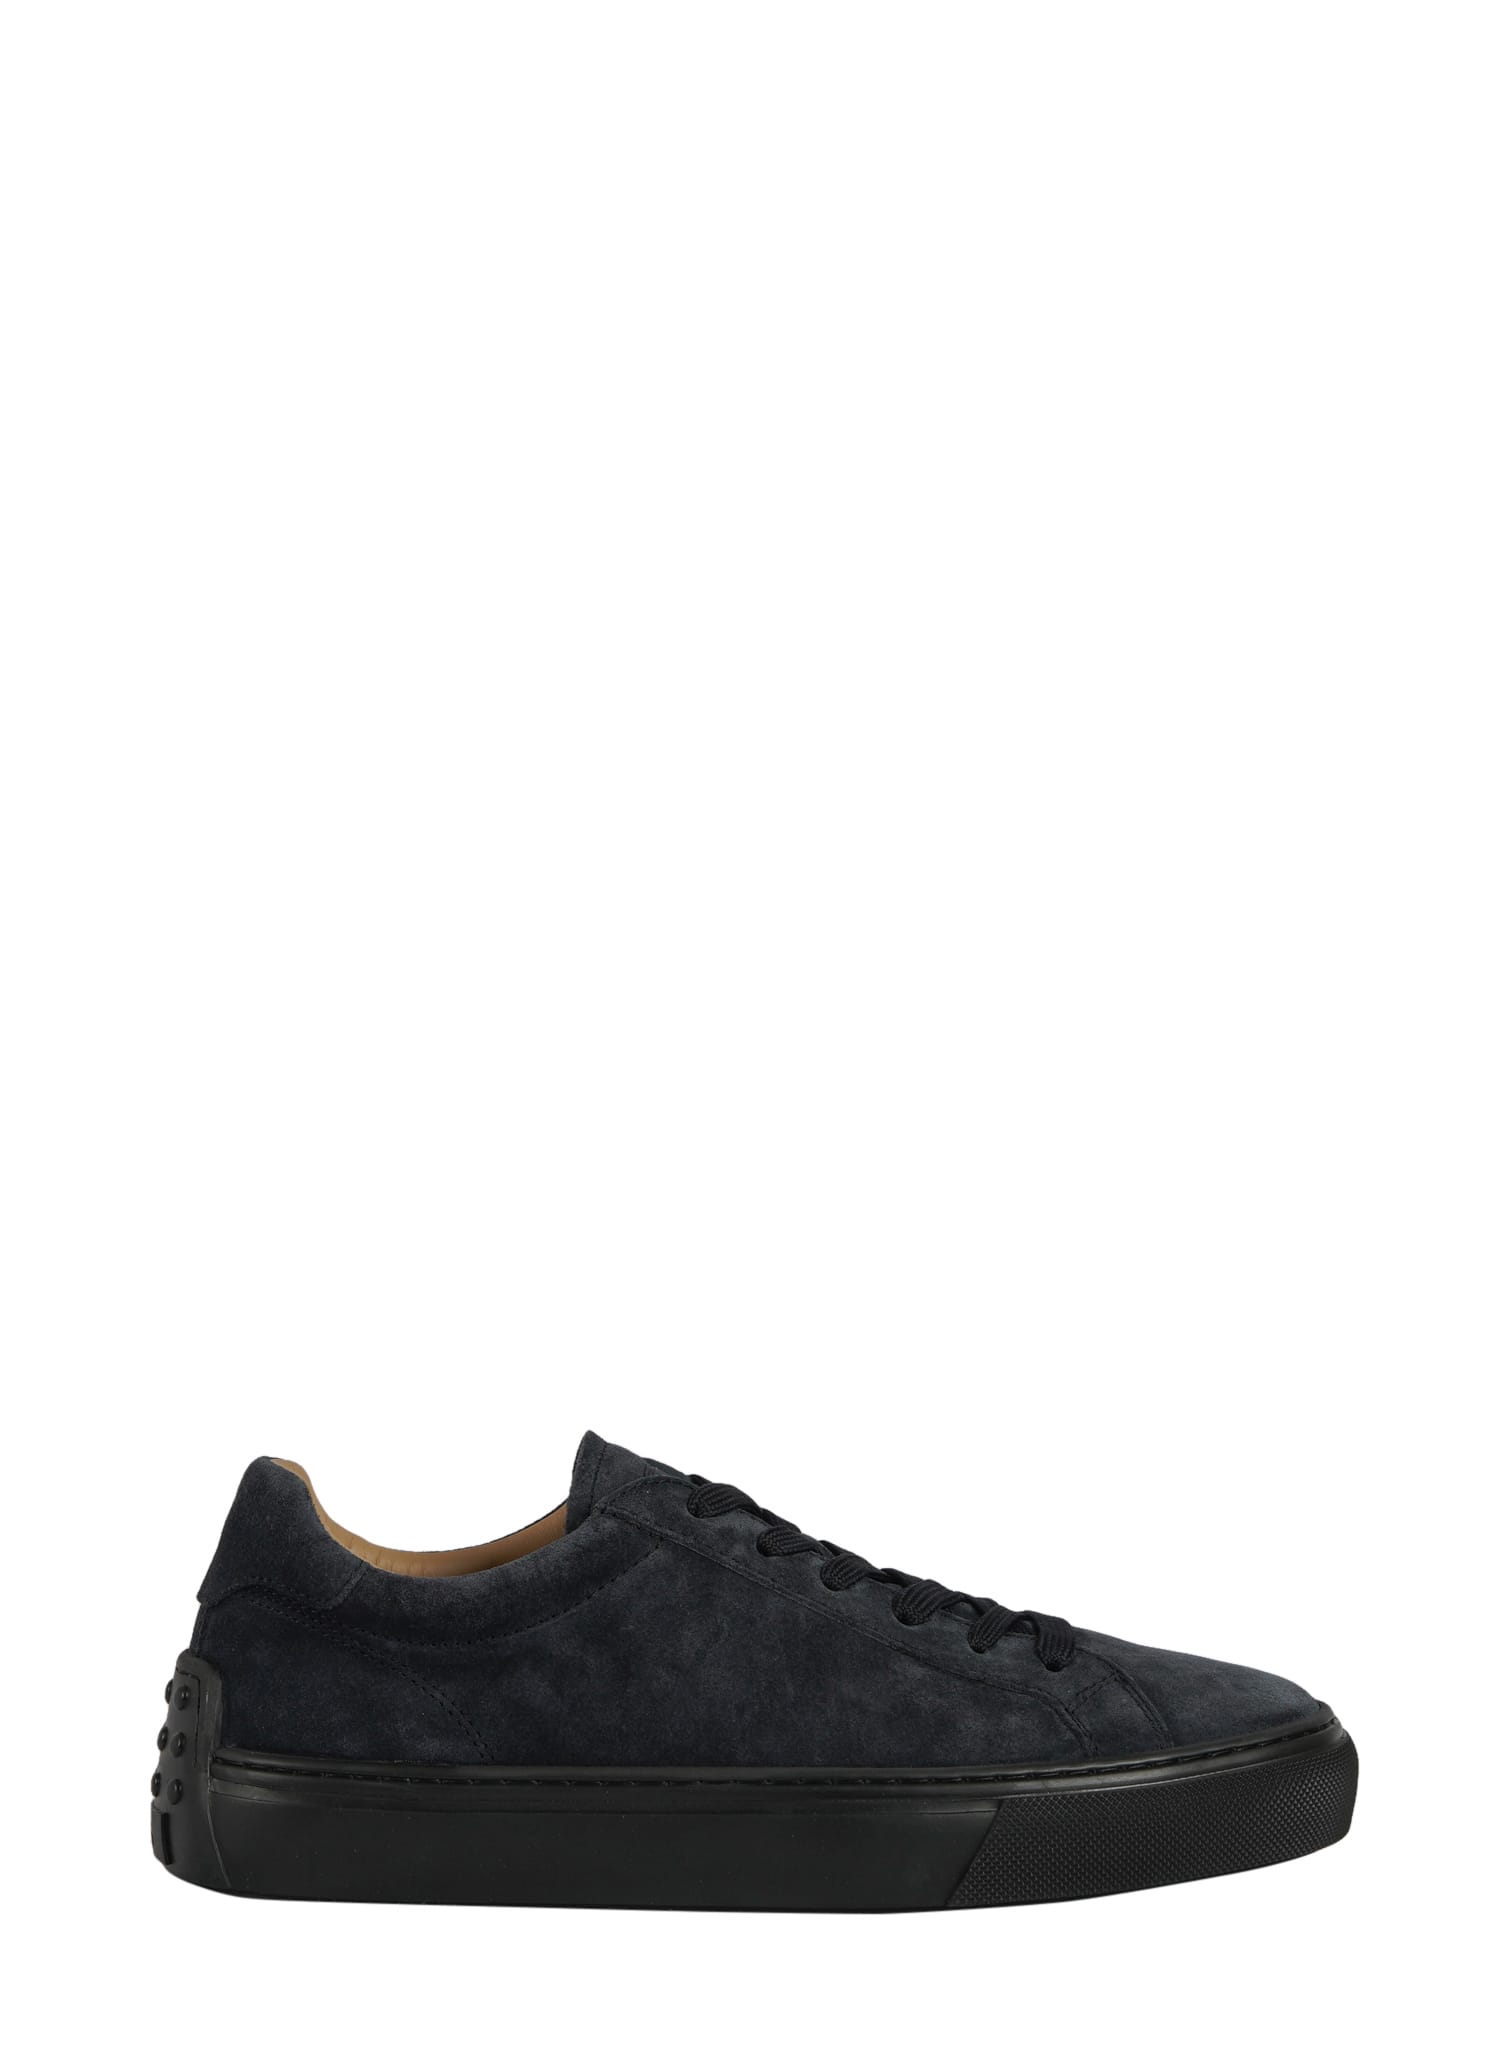 Tods All Bassa Cassetta Casual Laced Shoe